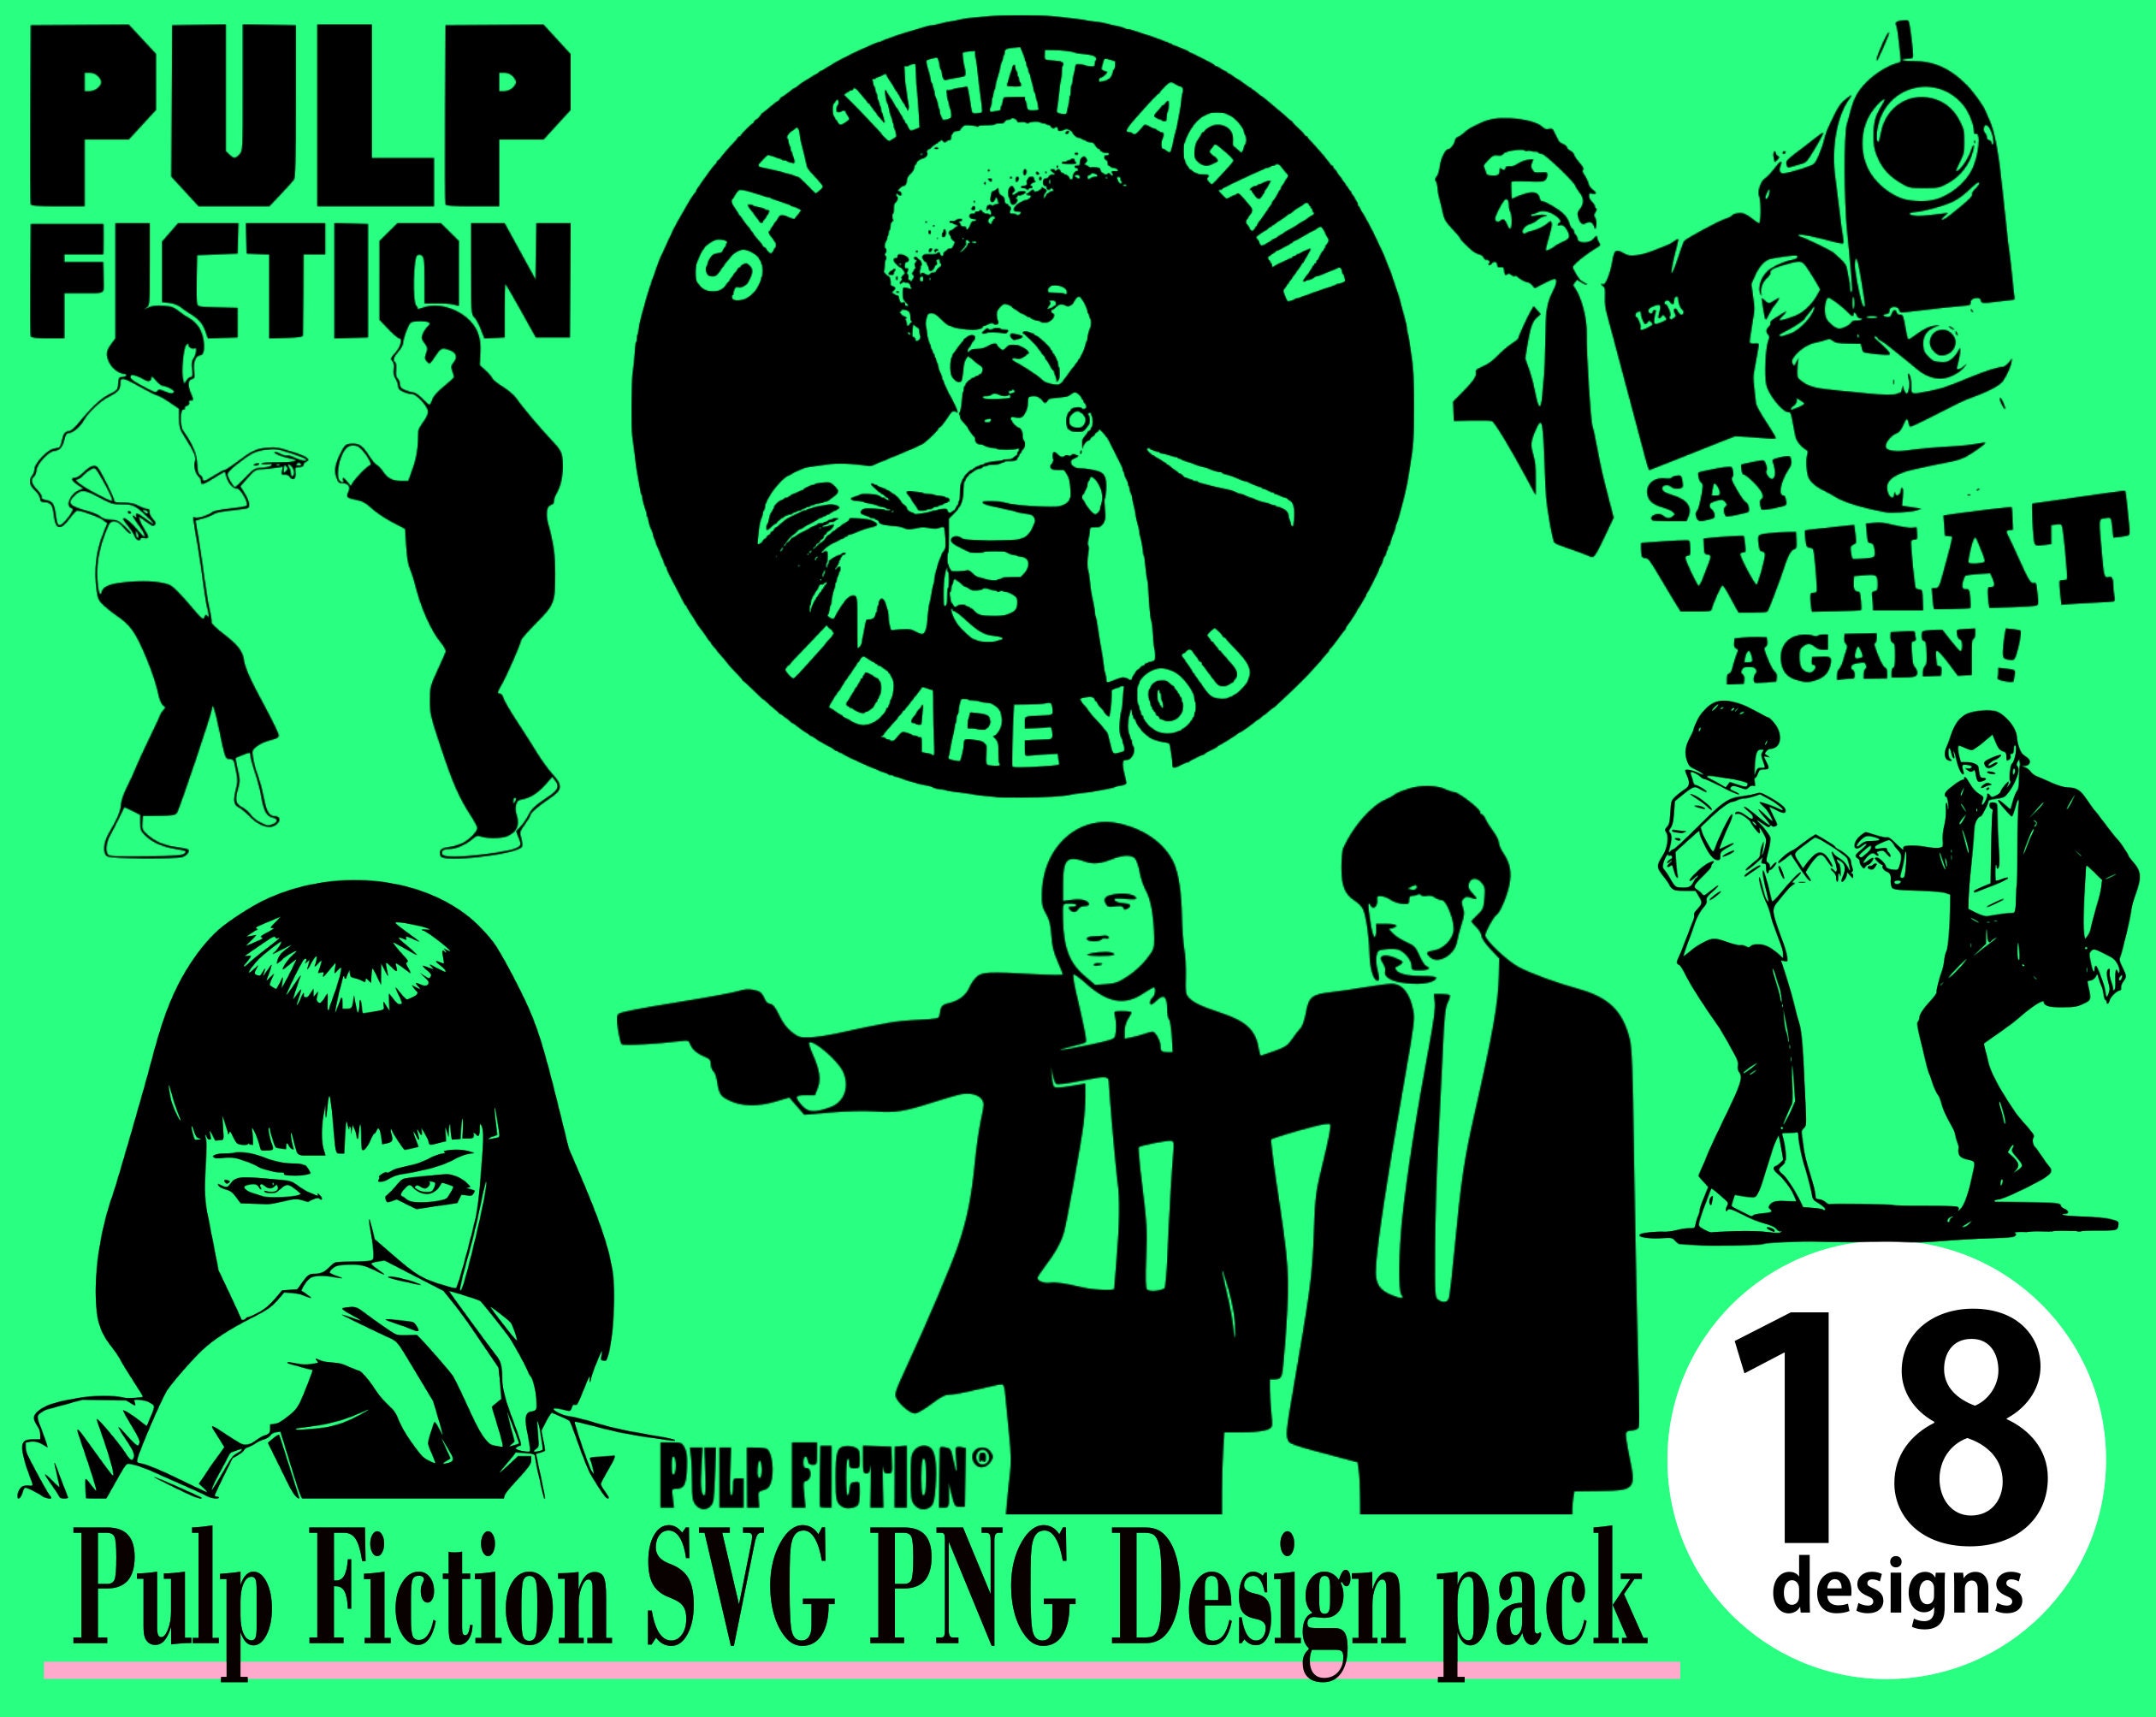 Pulp Fiction Stickers Quentin Tarantino Cult Movie Poster 22 PCE PC Car Skate 